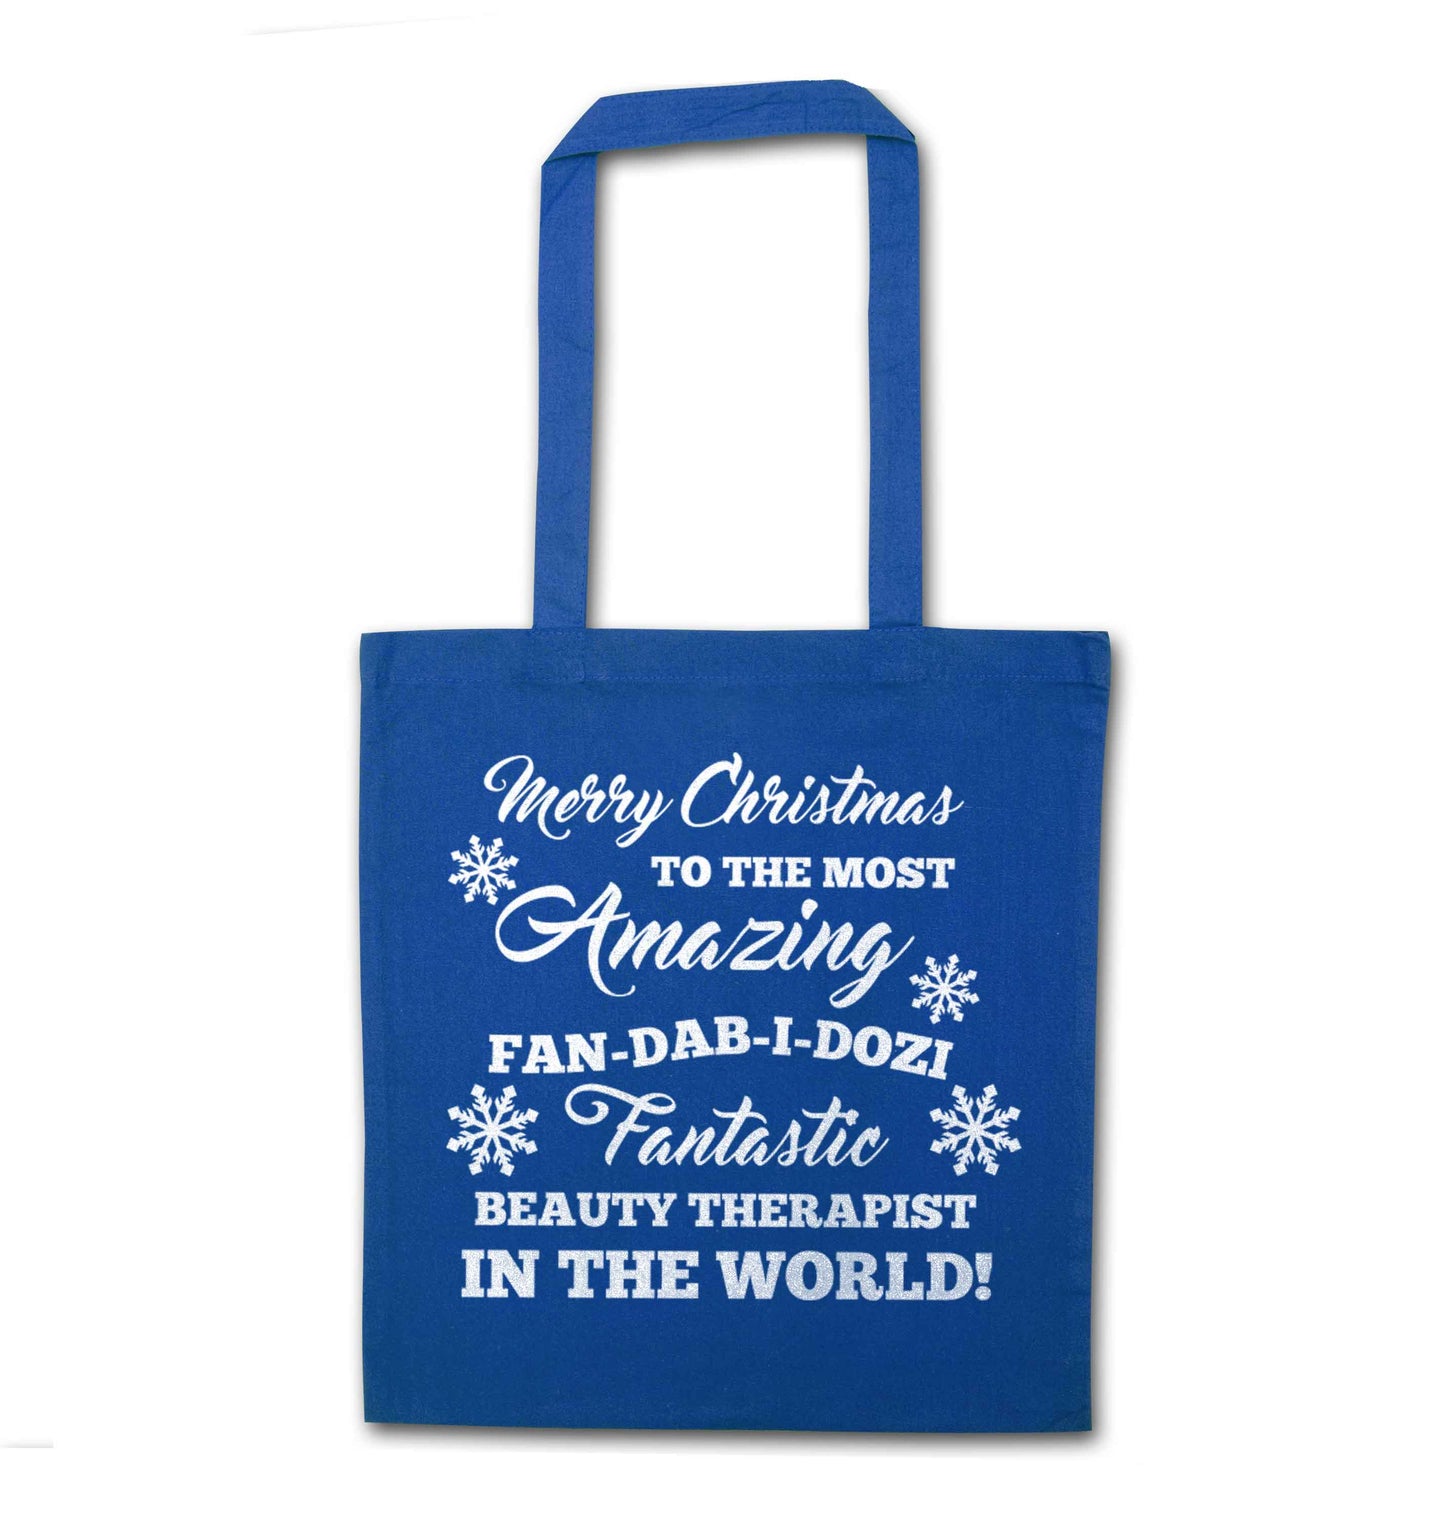 Merry Christmas to the most amazing fan-dab-i-dozi fantasic beauty therapist in the world blue tote bag